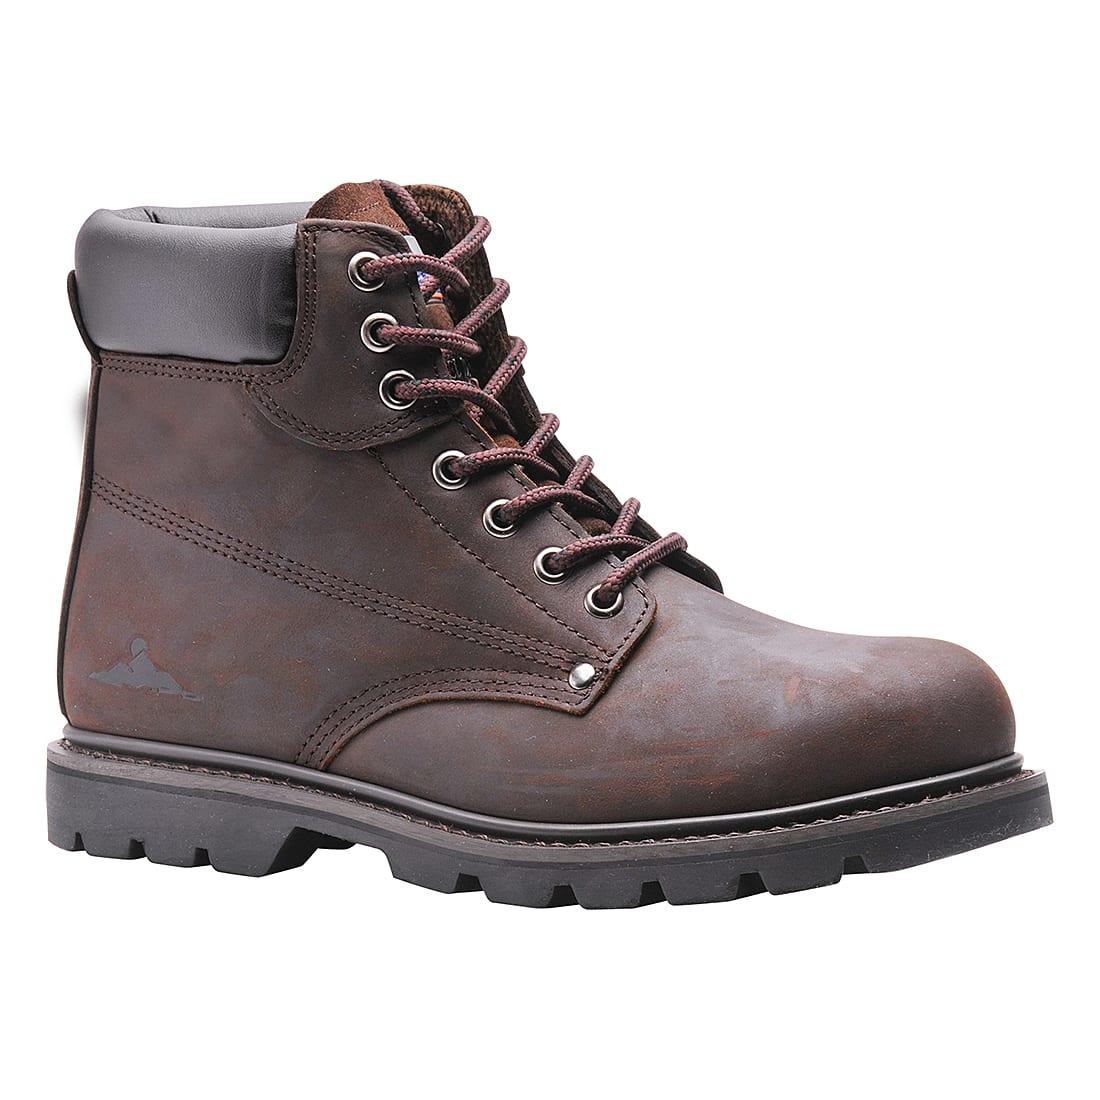 Portwest Steelite Welted Safety Boots SB HRO in Brown (Product Code: FW17)